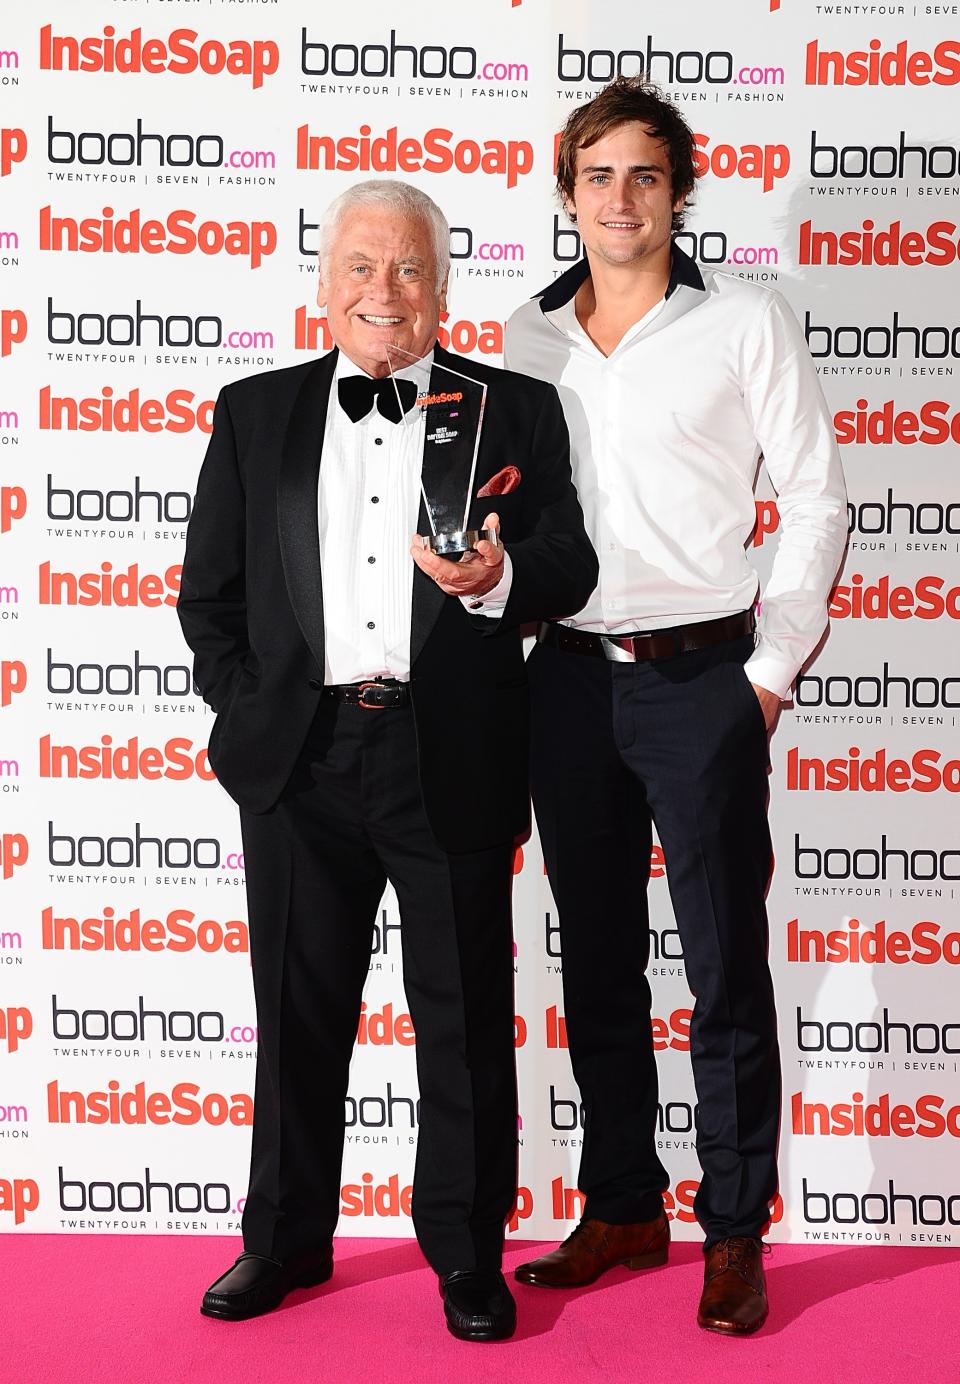 Neighbours cast members Tom Oliver and Chris Milligan with the award for Best Daytime Soap at the 2012 Inside Soap Awards at One Marylebone, London.